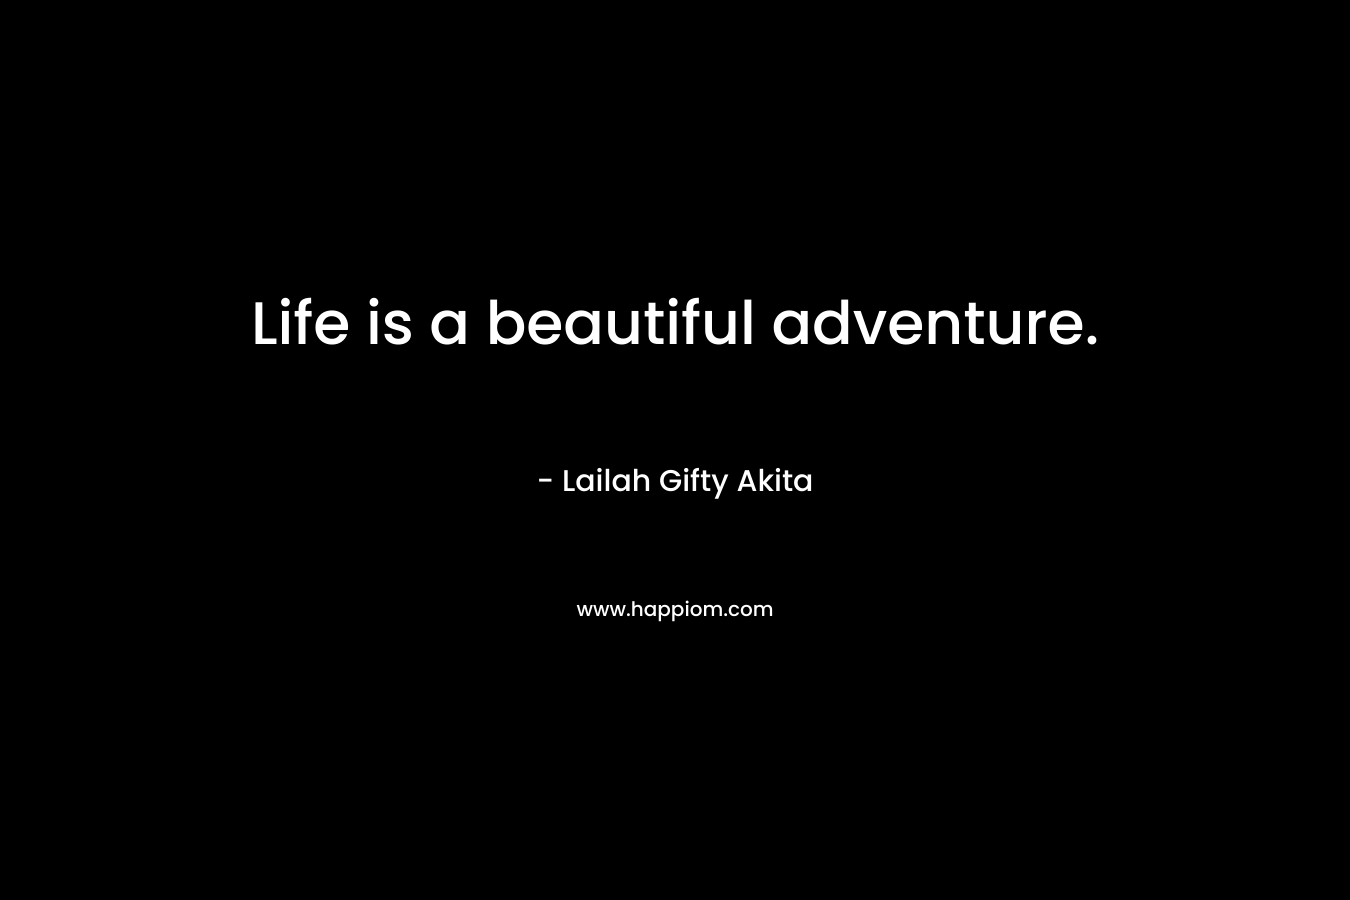 Life is a beautiful adventure.